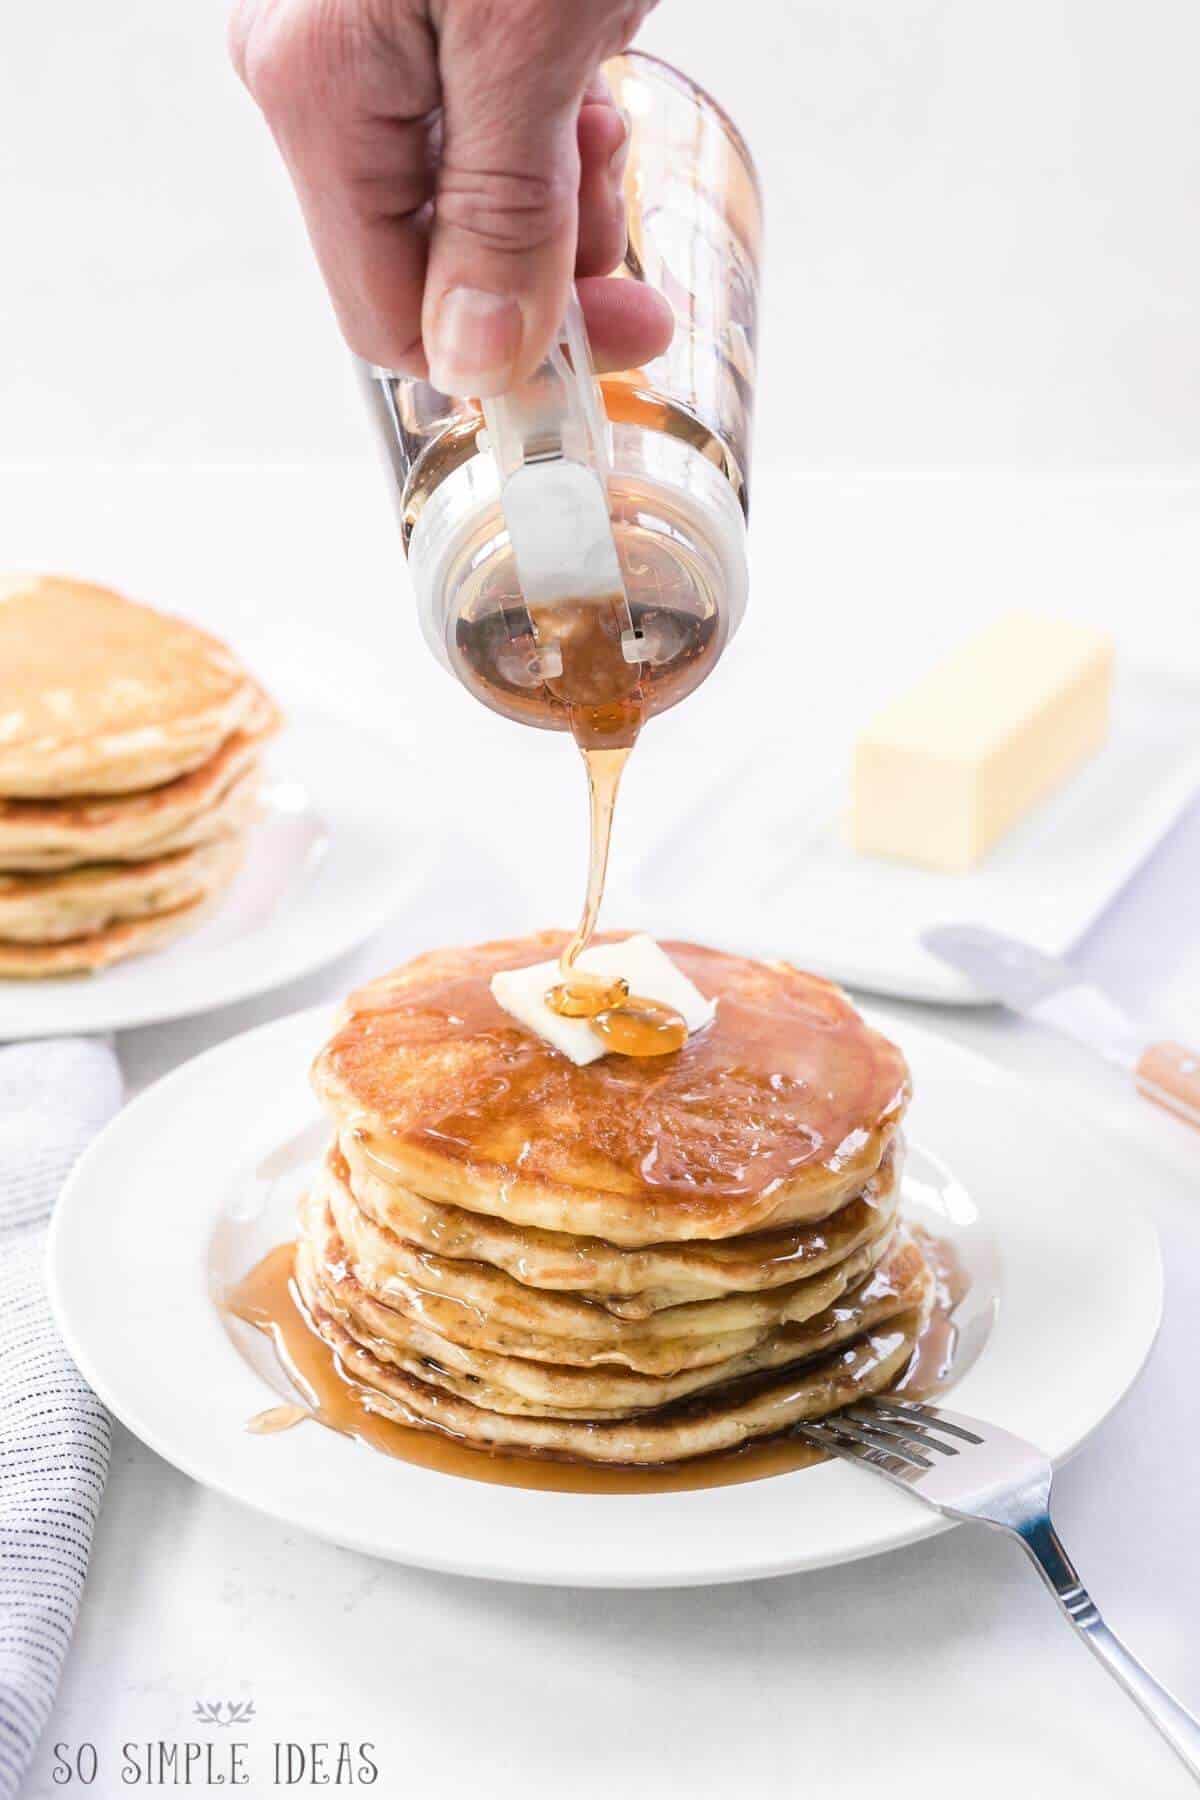 pouring maple syrup over stack of pancakes